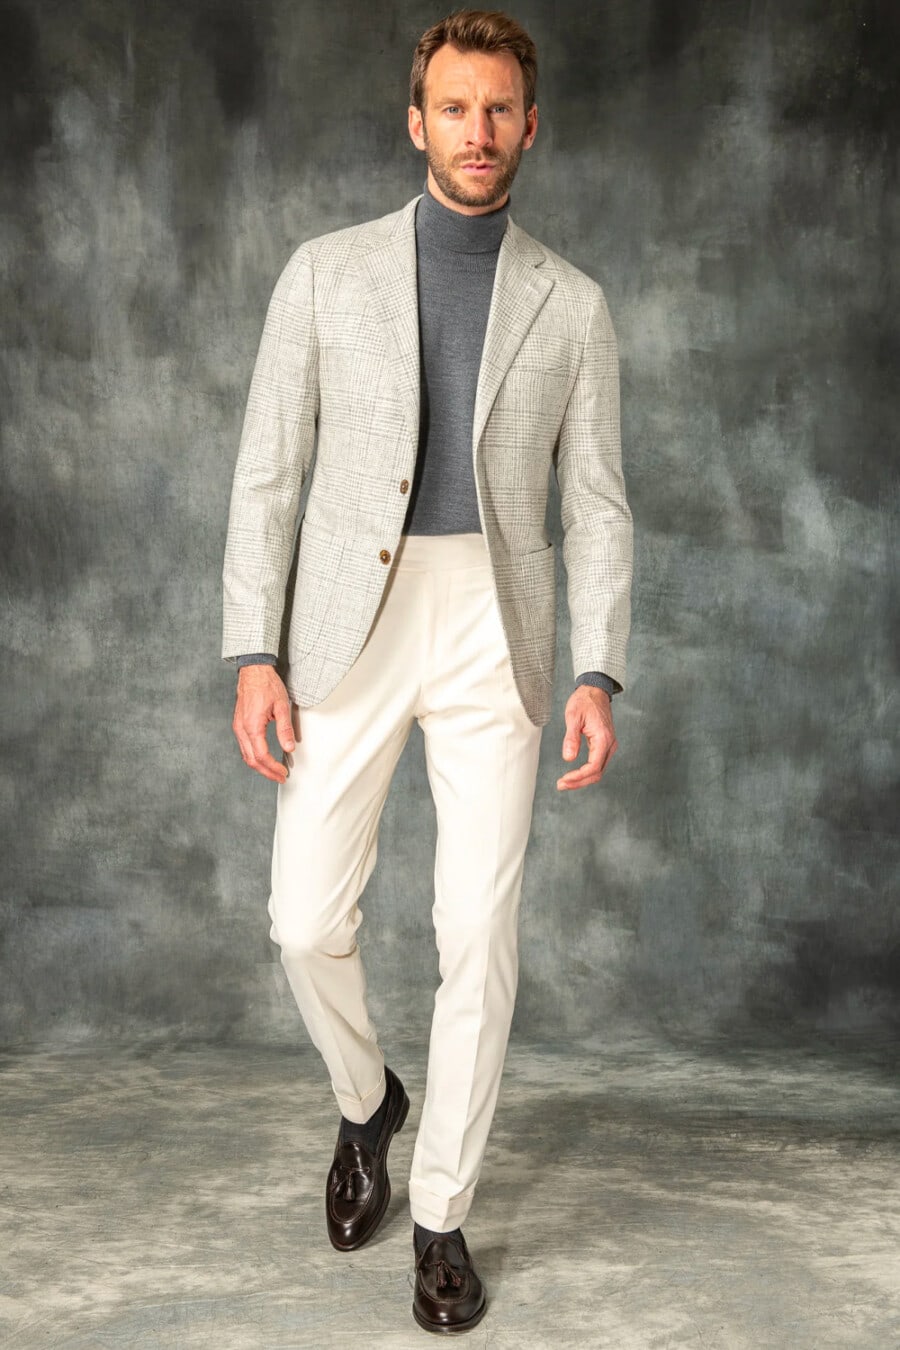 Men's light grey check blazer, mid grey turtleneck, ivory tailored pants, charcoal socks and brown leather tassel loafers outfit